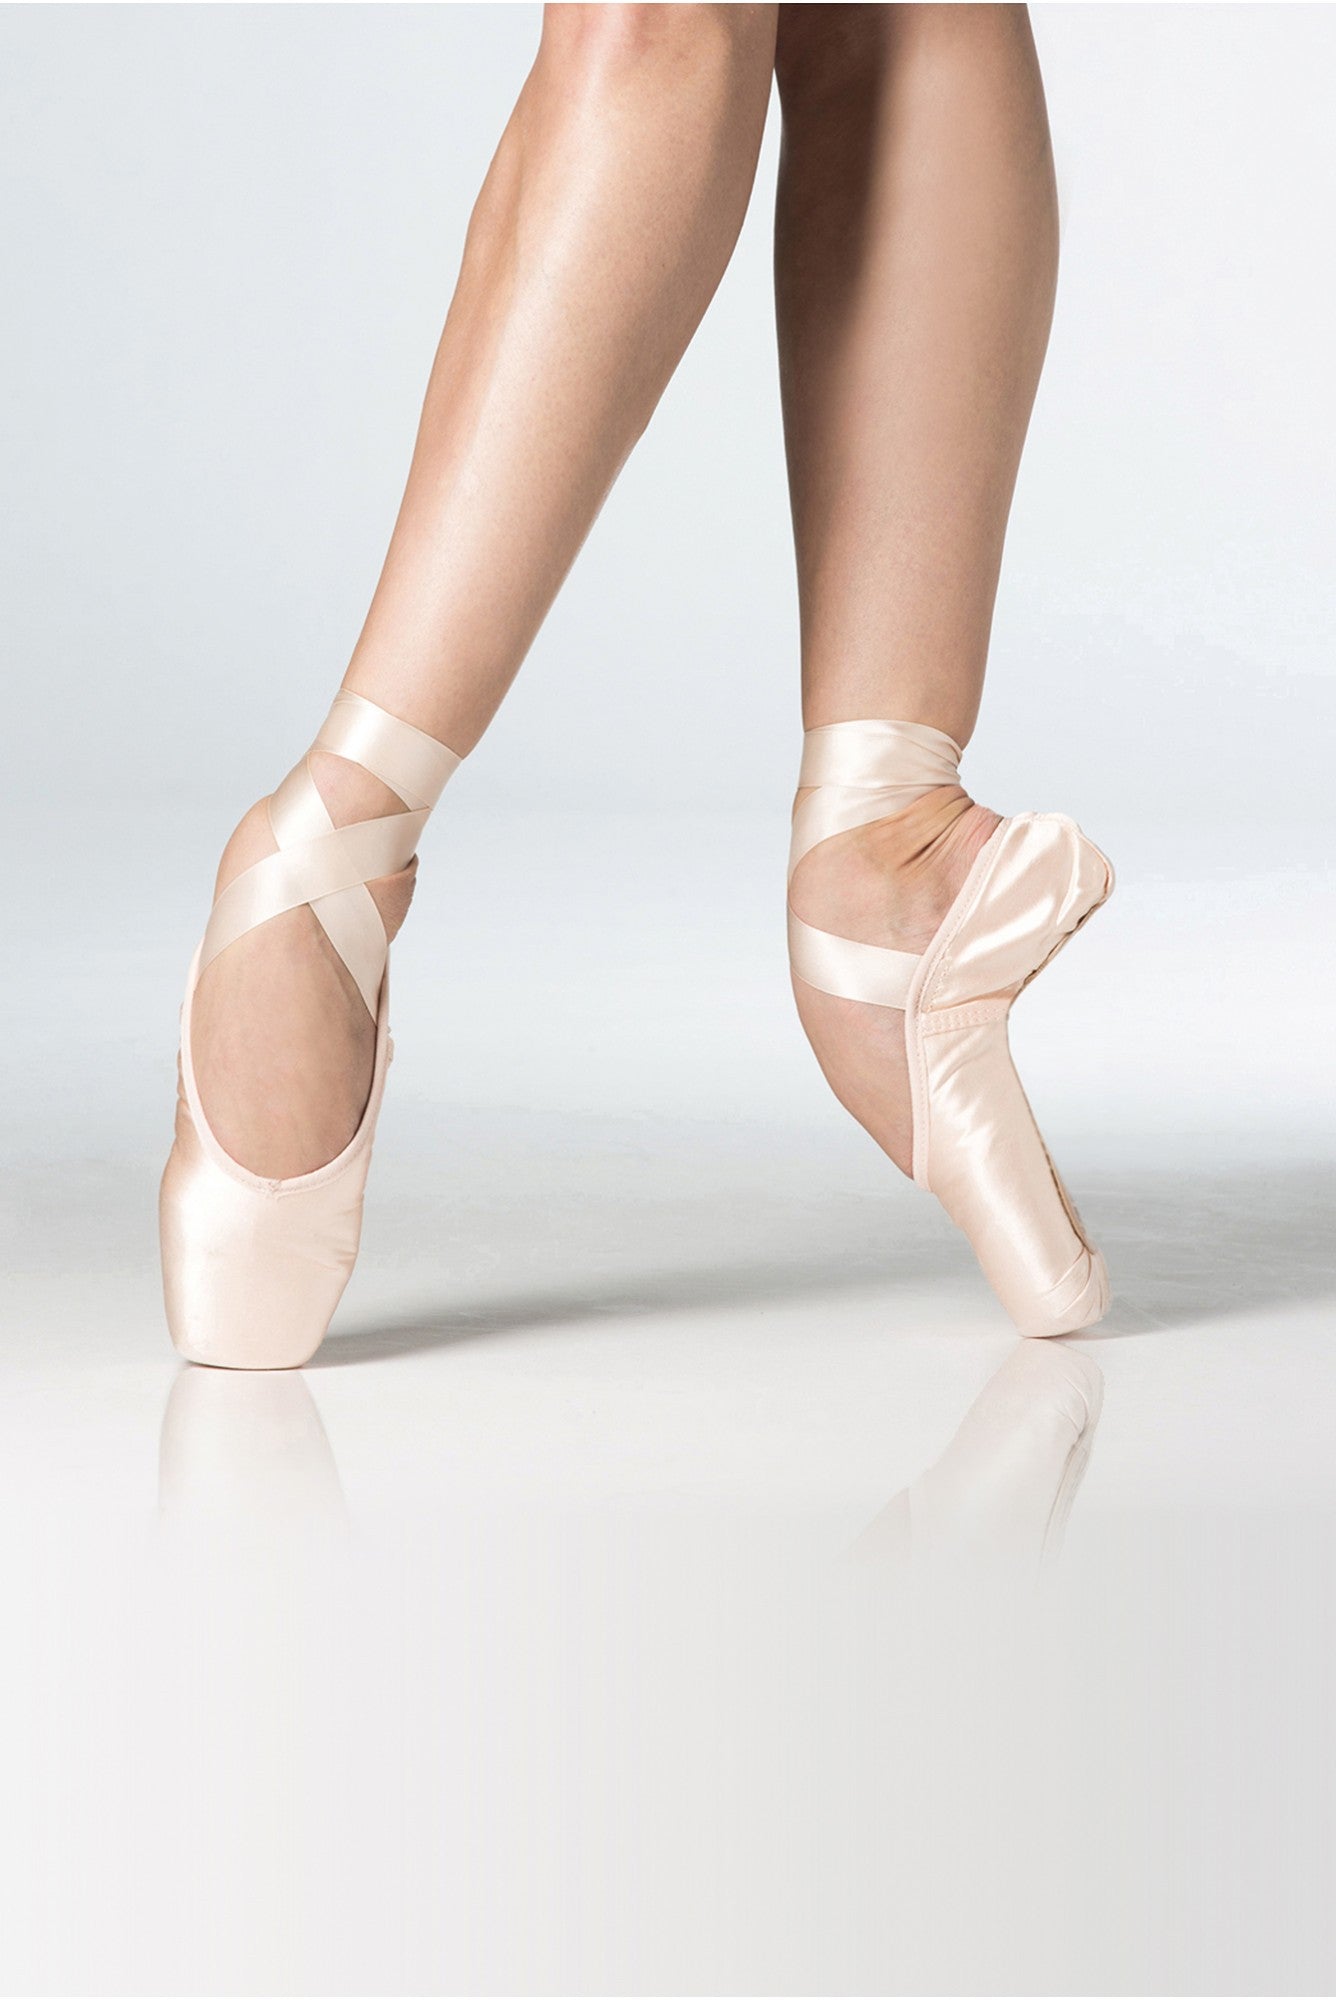 Sewing Pointe Shoes - Pirouette Dancewear The Specialty Dance Store